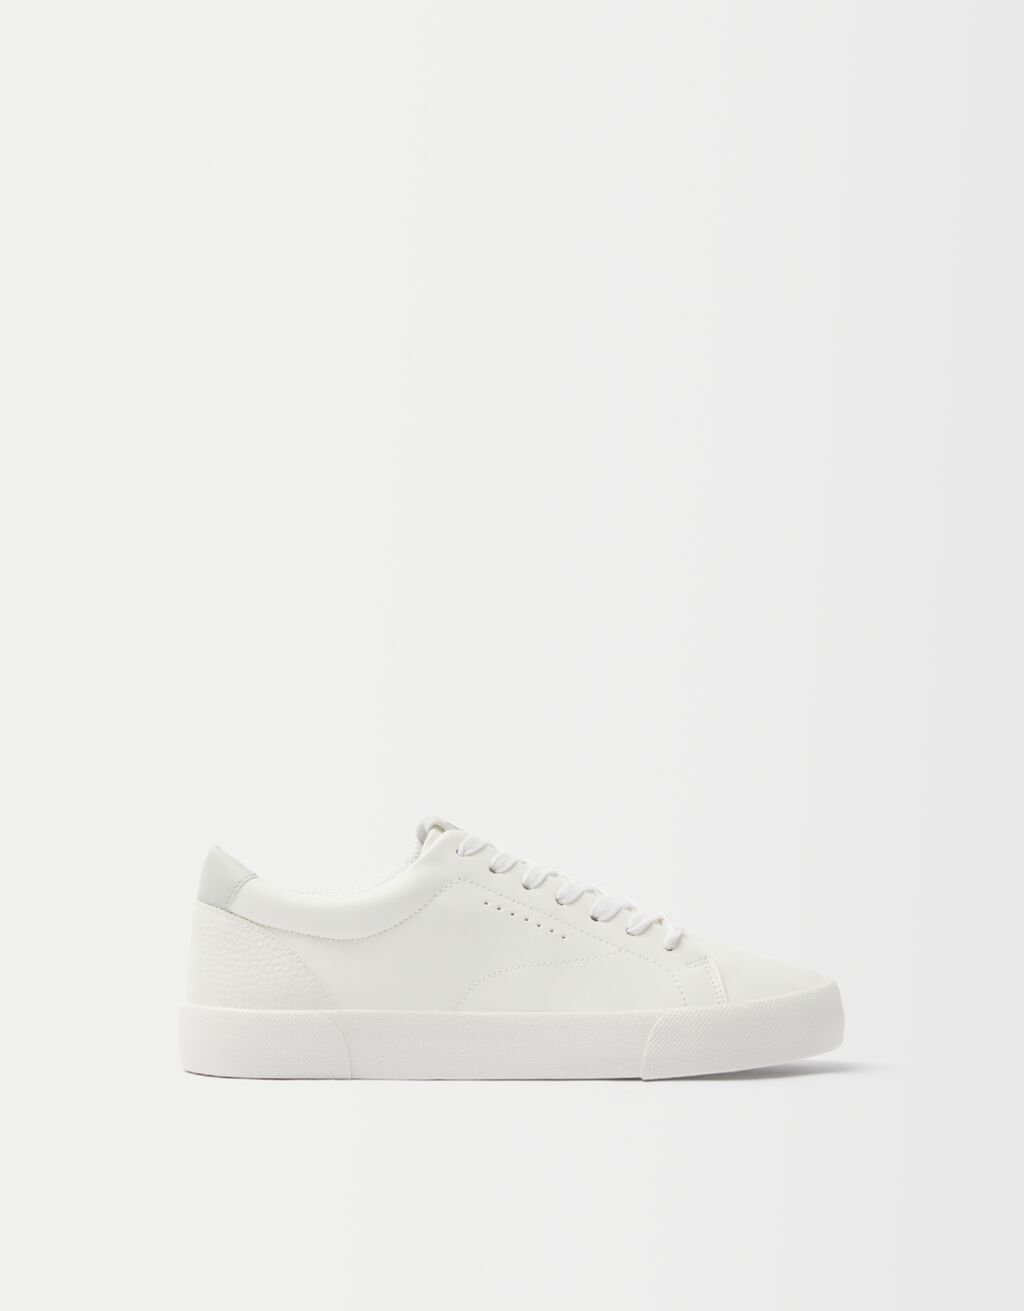 Men’s trainers with coloured heel detail